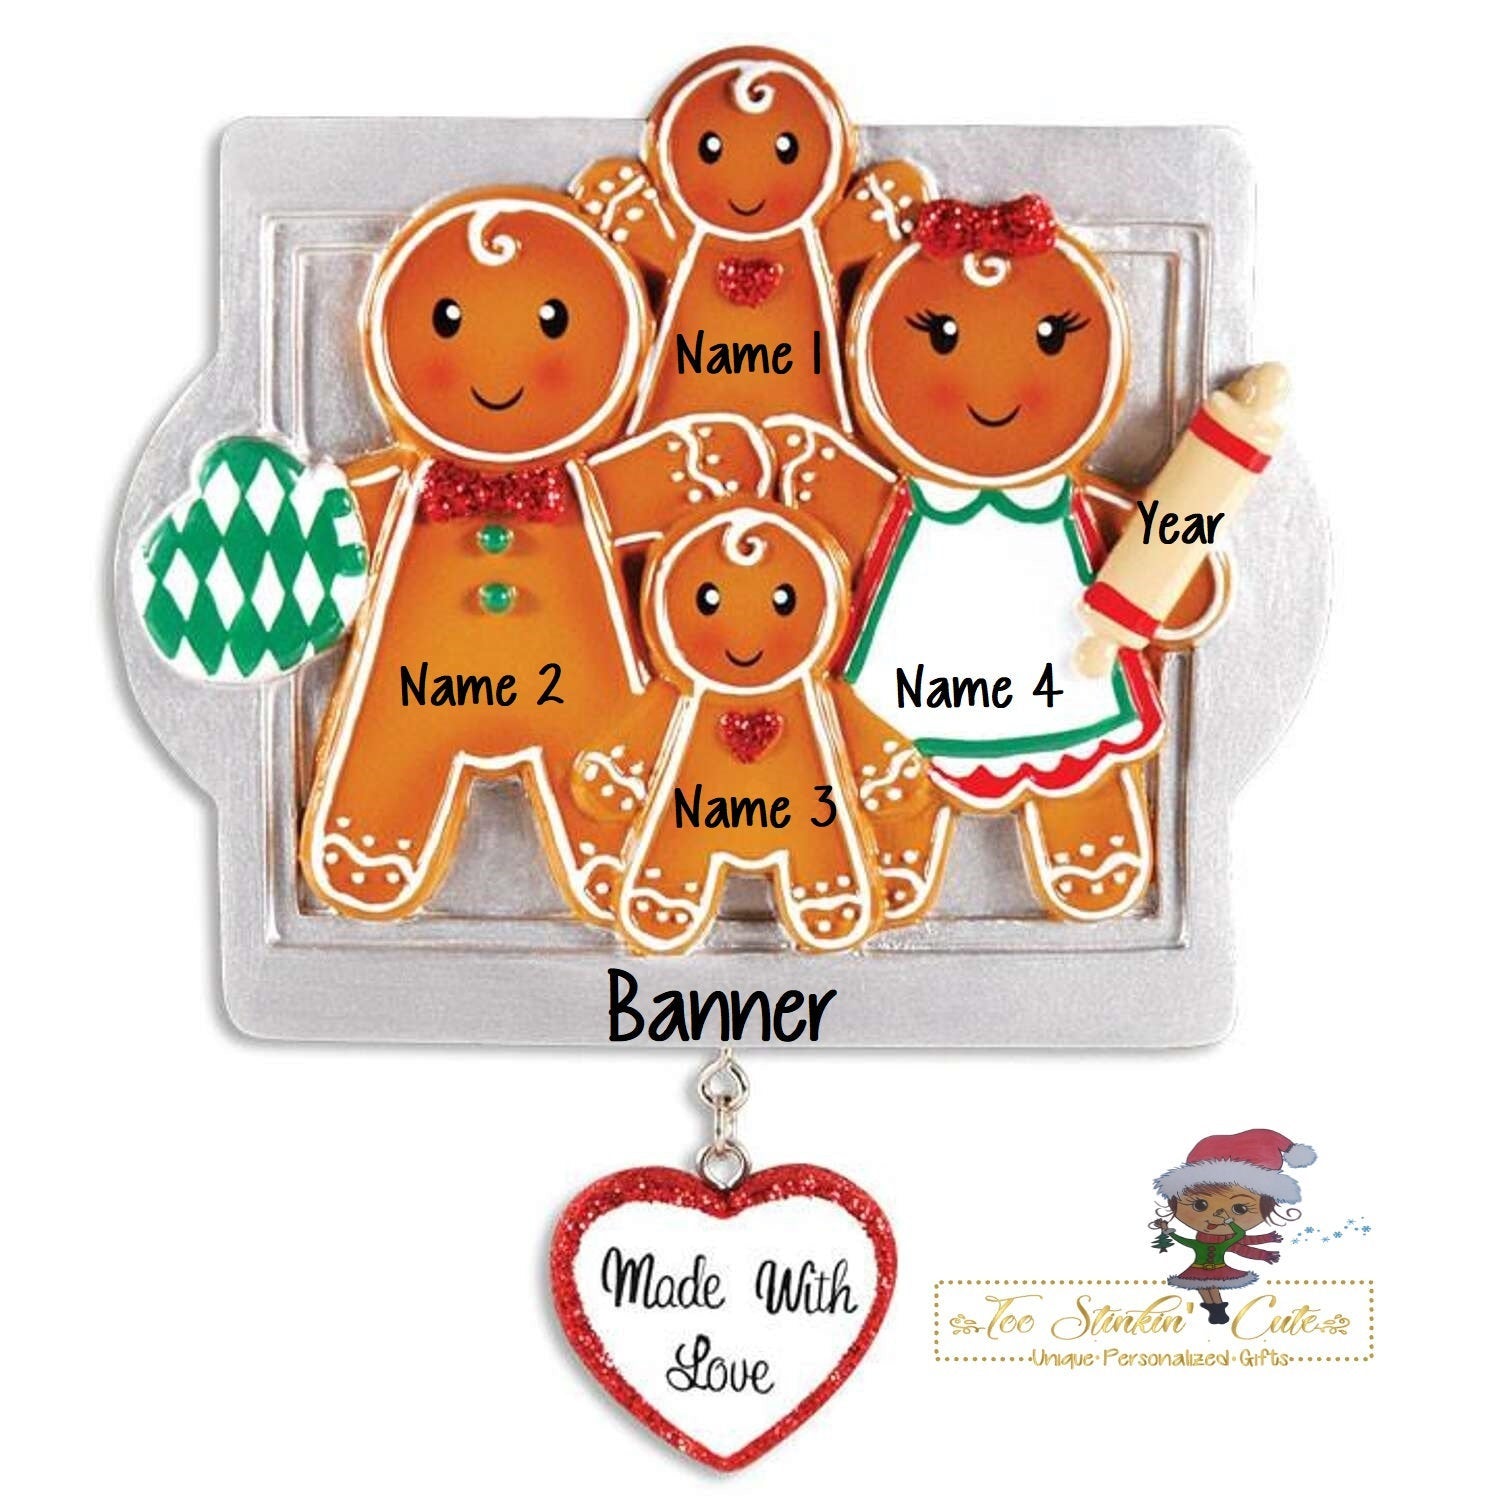 Christmas Ornament Gingerbread Made with Love Family of 4/ Friends/ Coworkers Personalized! + Free Shipping!